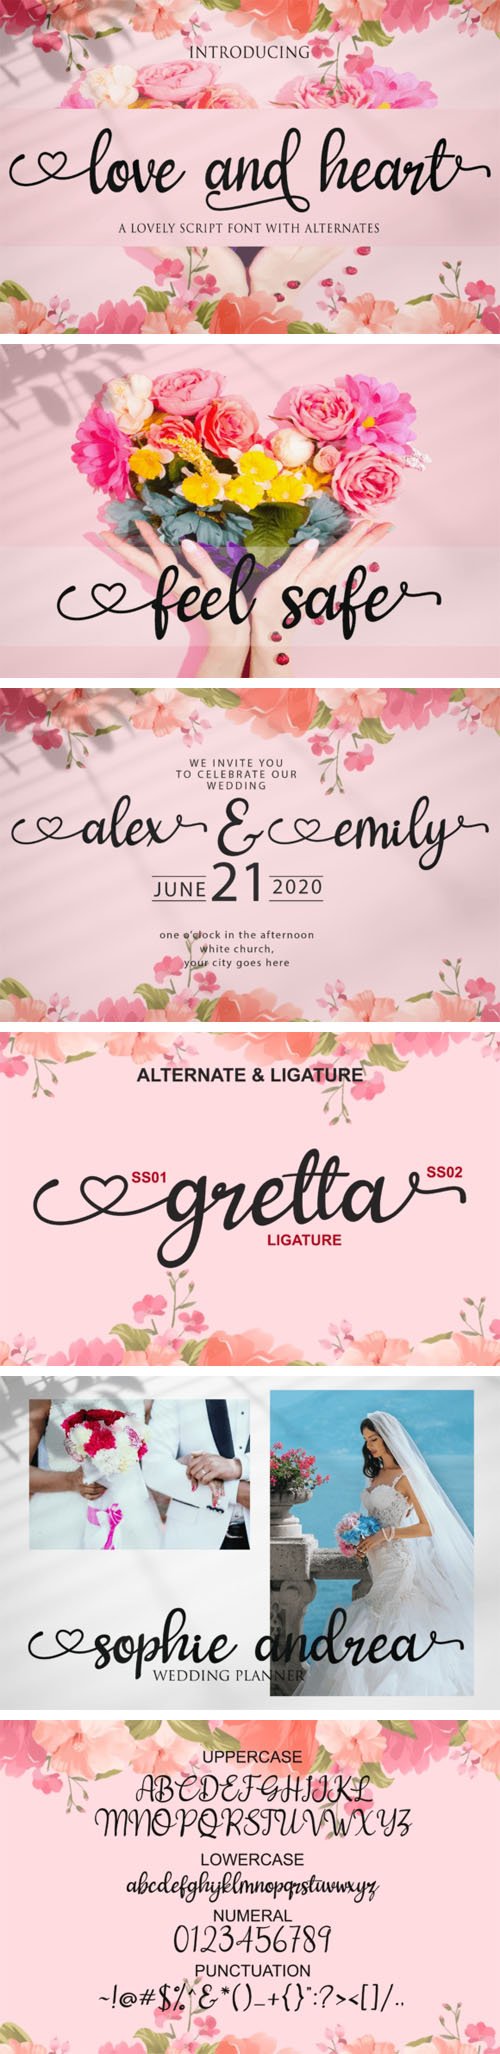 Love and Heart - Lovely Script Font